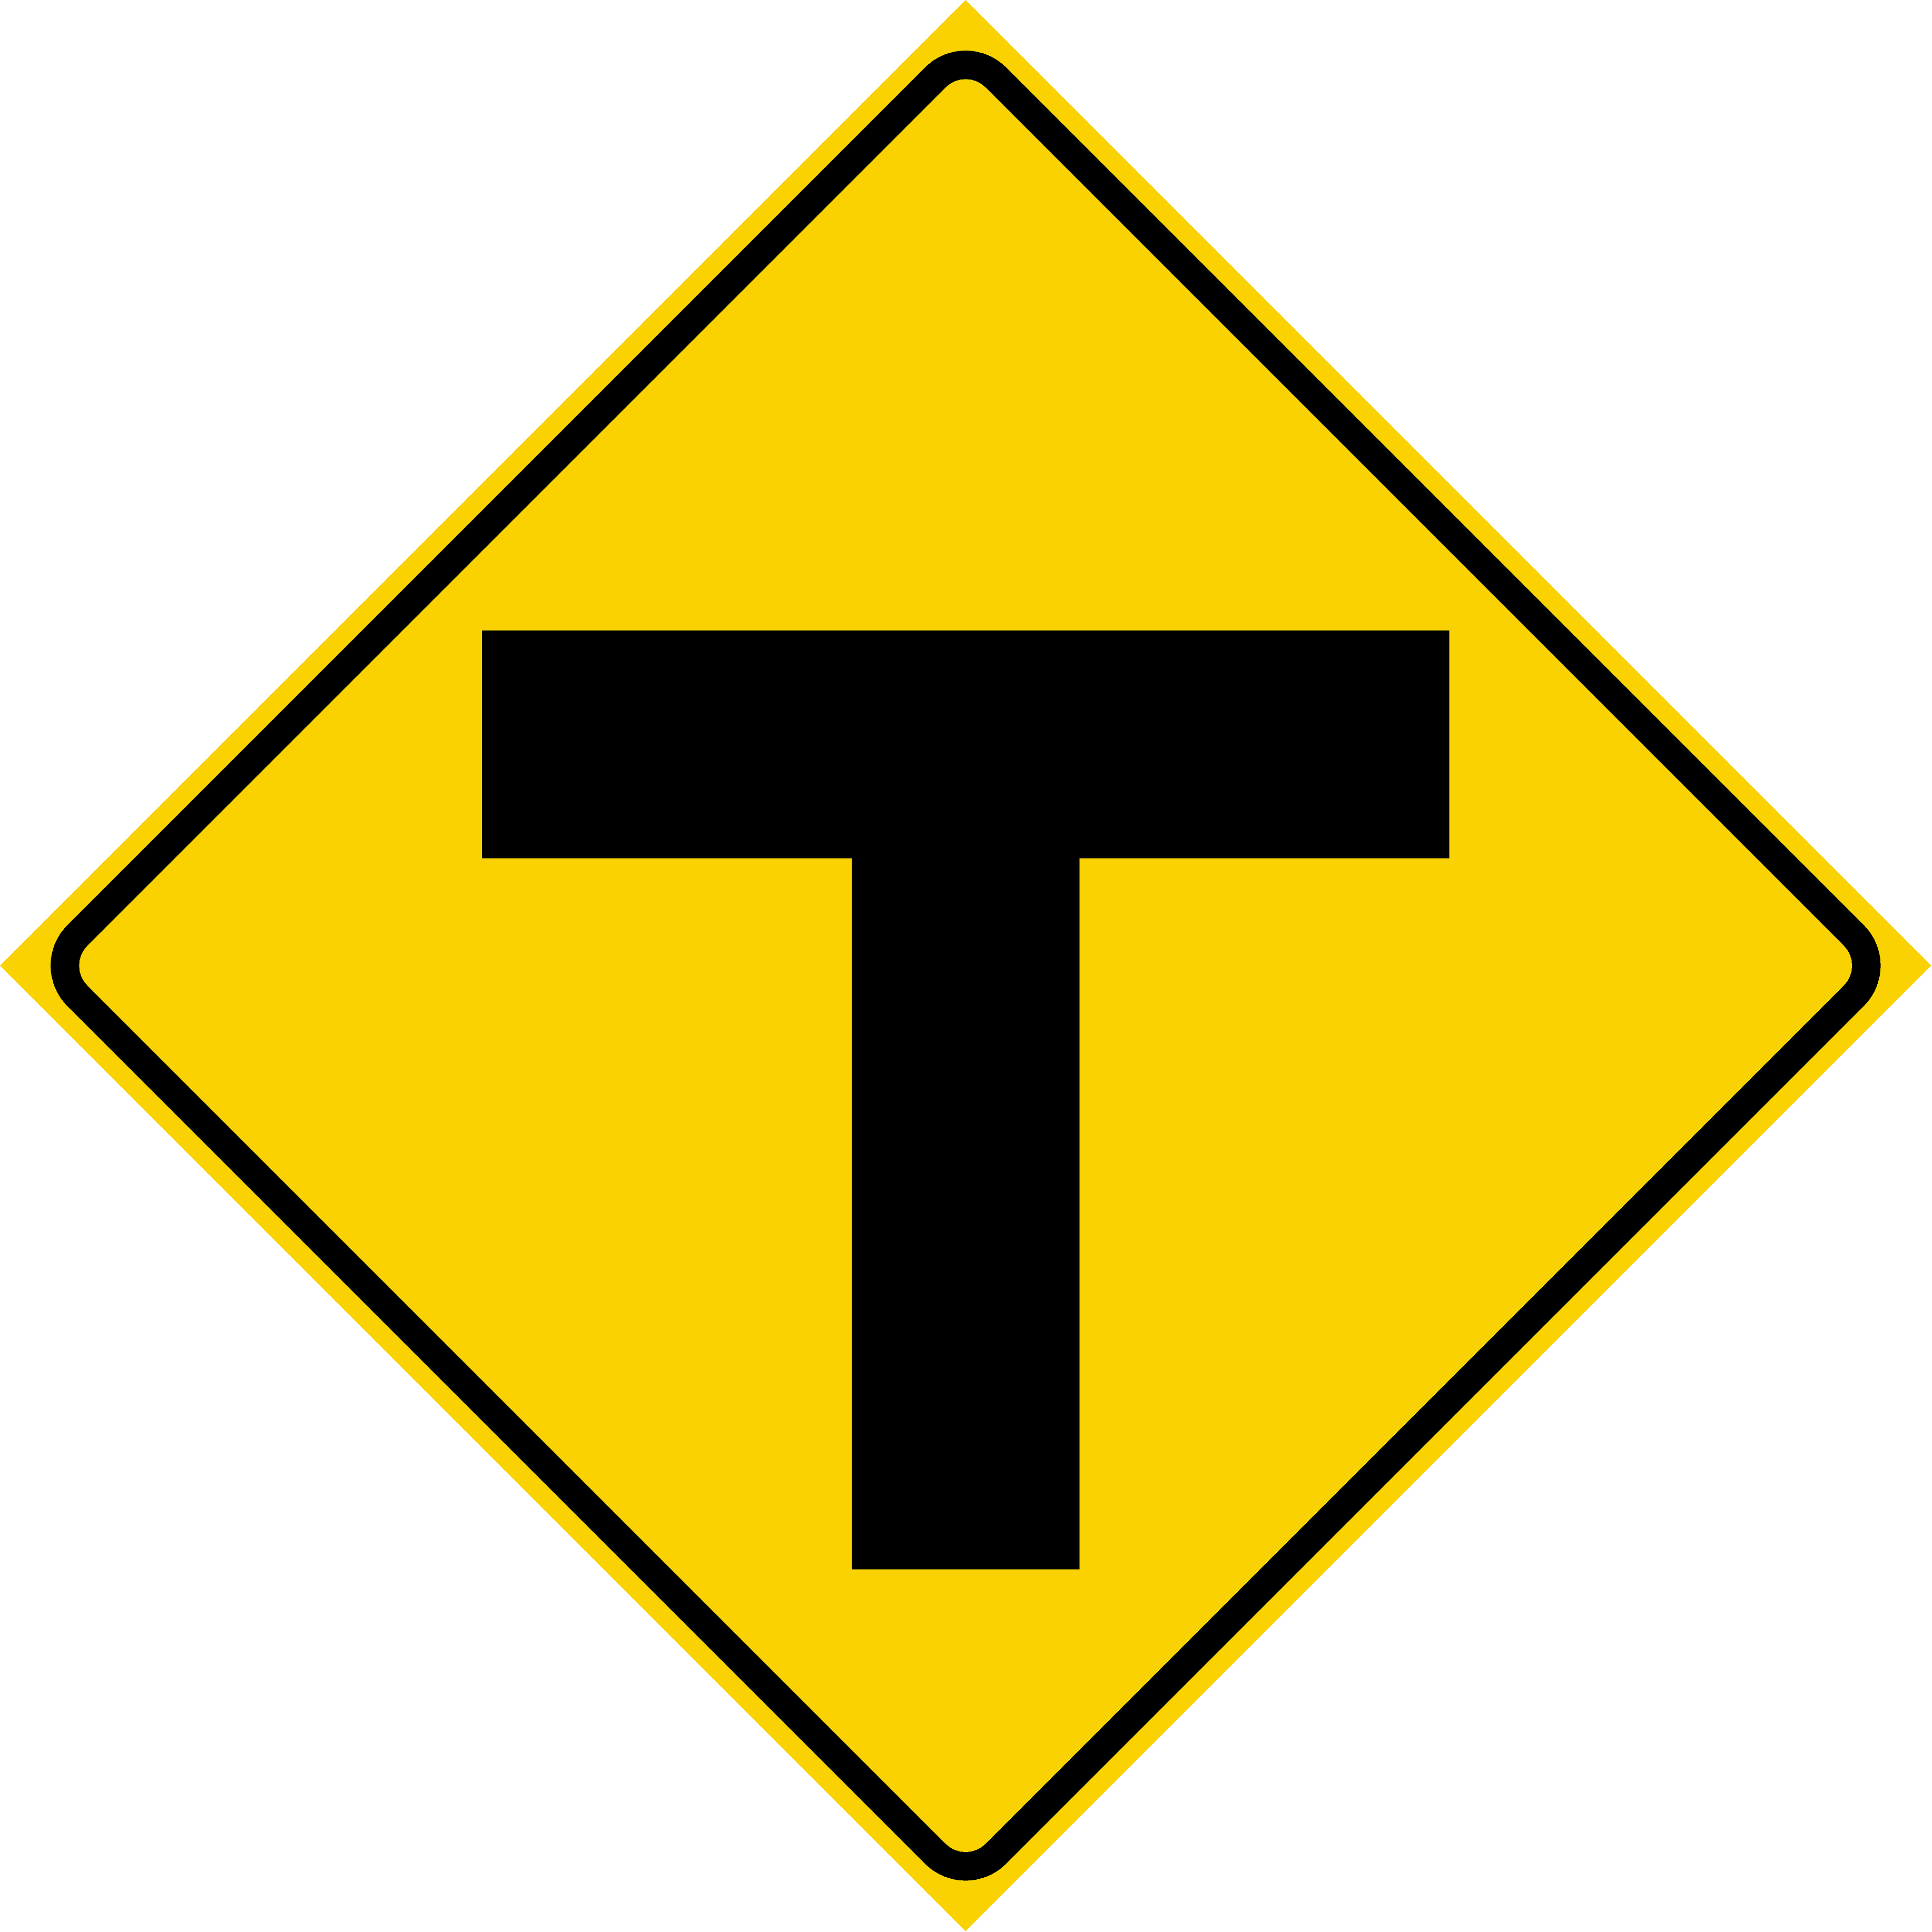 T Intersection (W2-4)